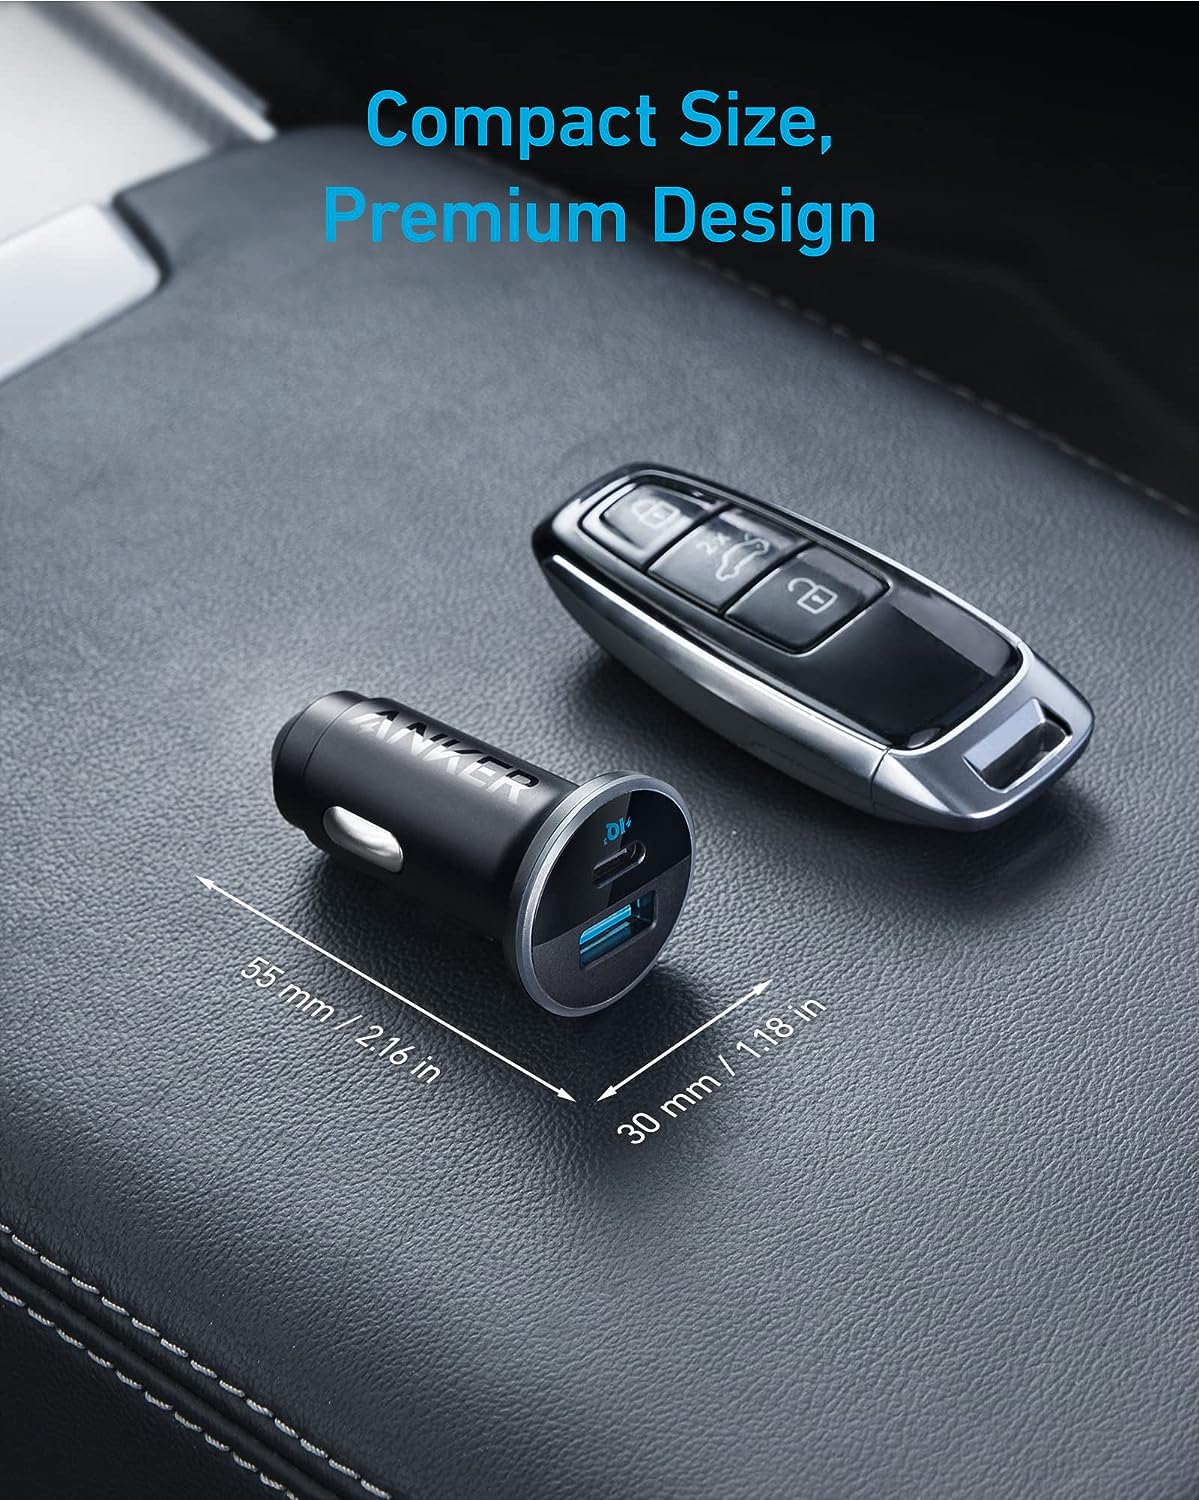 USB C Car Charger Adapter, Anker 52.5W Cigarette Lighter USB Charger, 323 Anker Car Charger